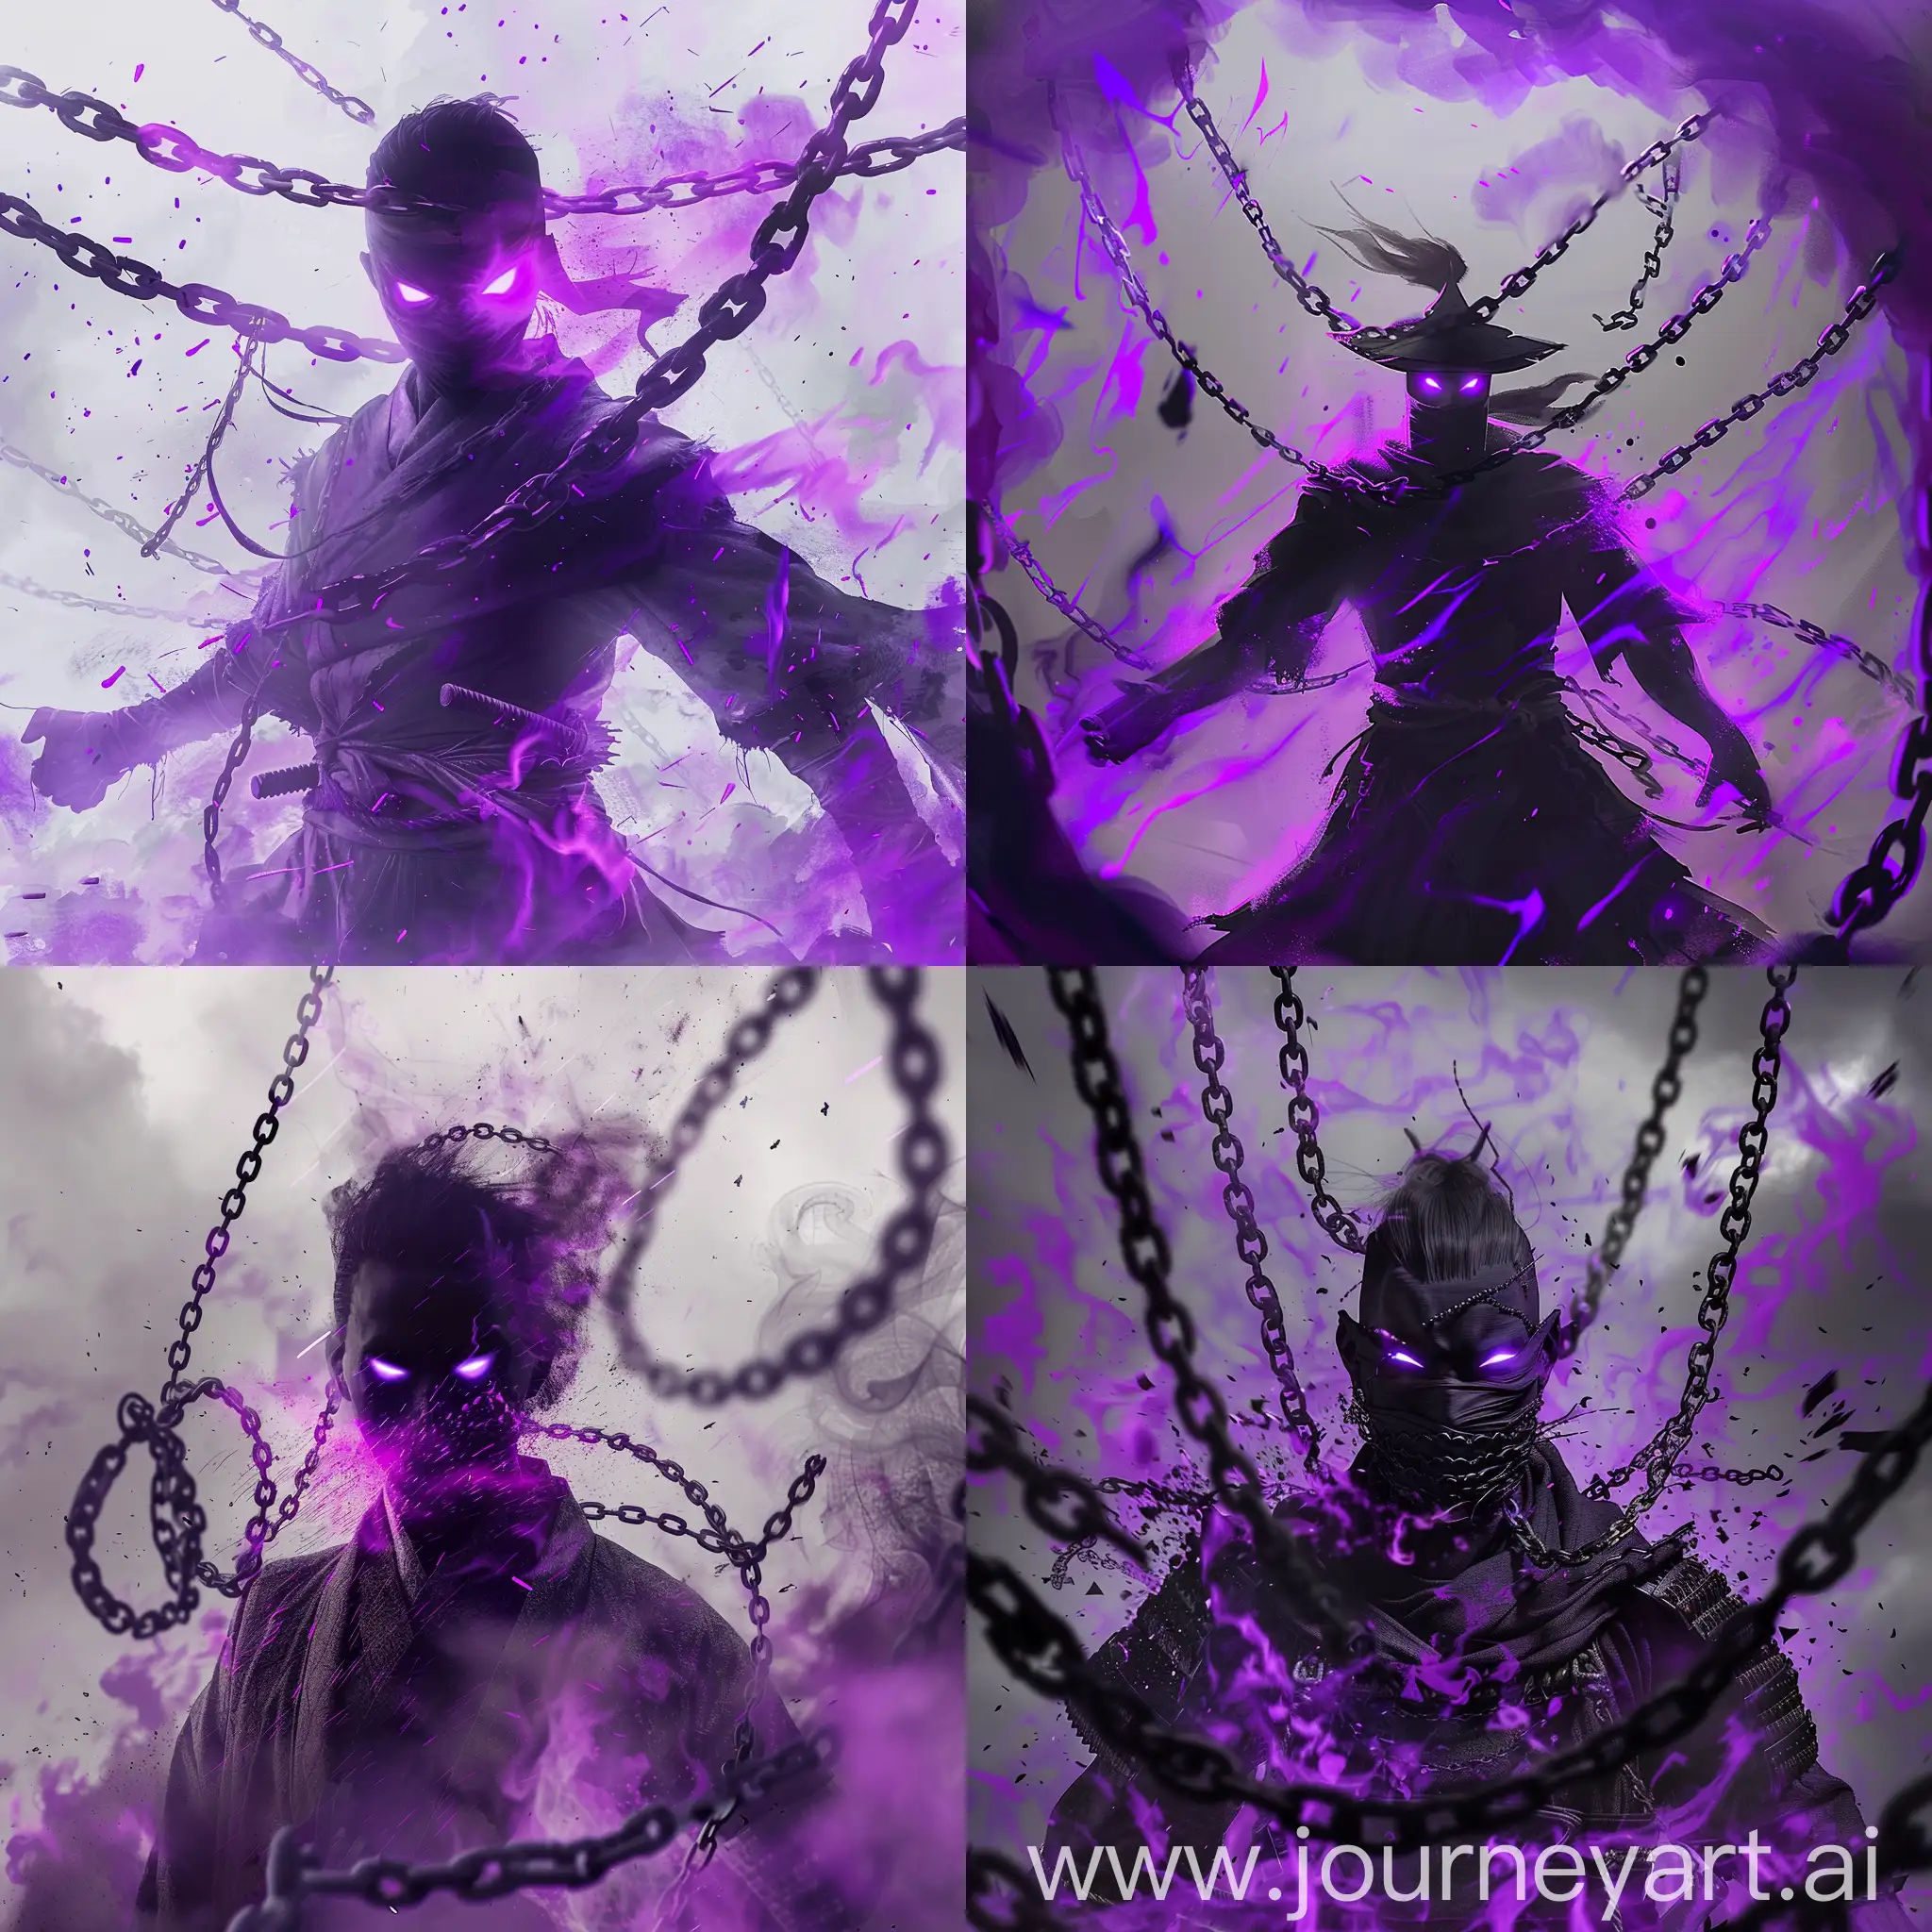 Mystical-Shadow-Samurai-with-Glowing-Purple-Eyes-amidst-Chains-and-Smoke